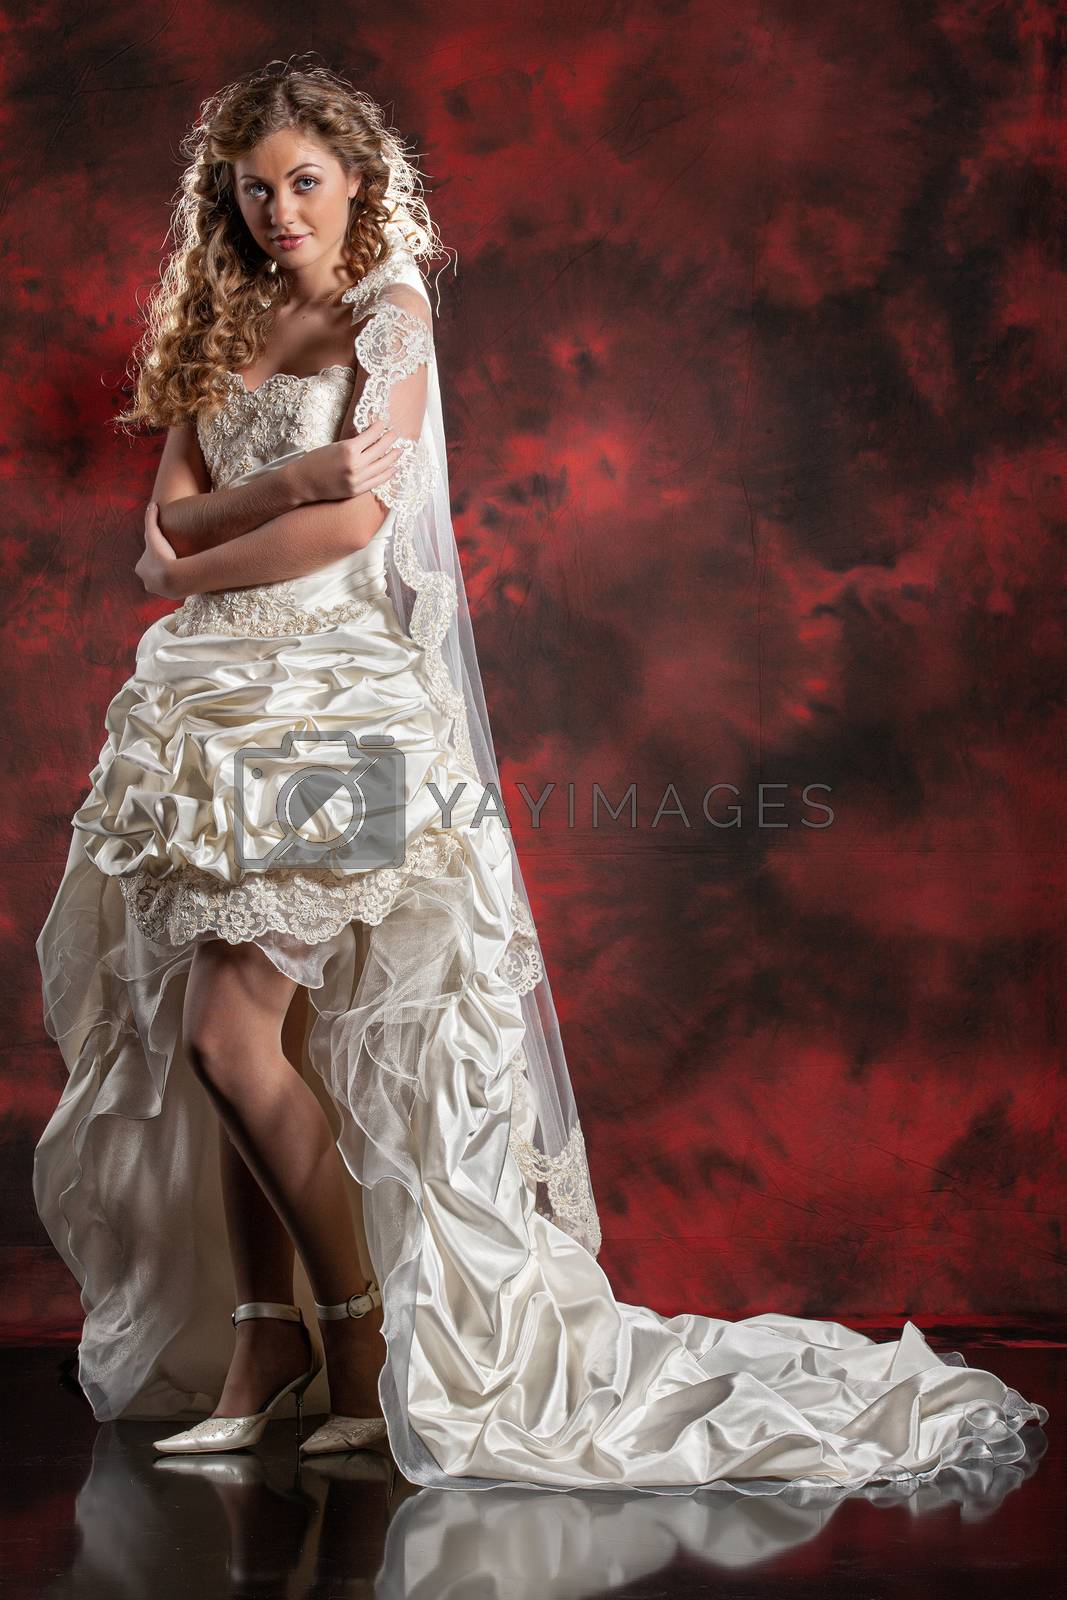 Royalty free image of Young Bride by Fotoskat